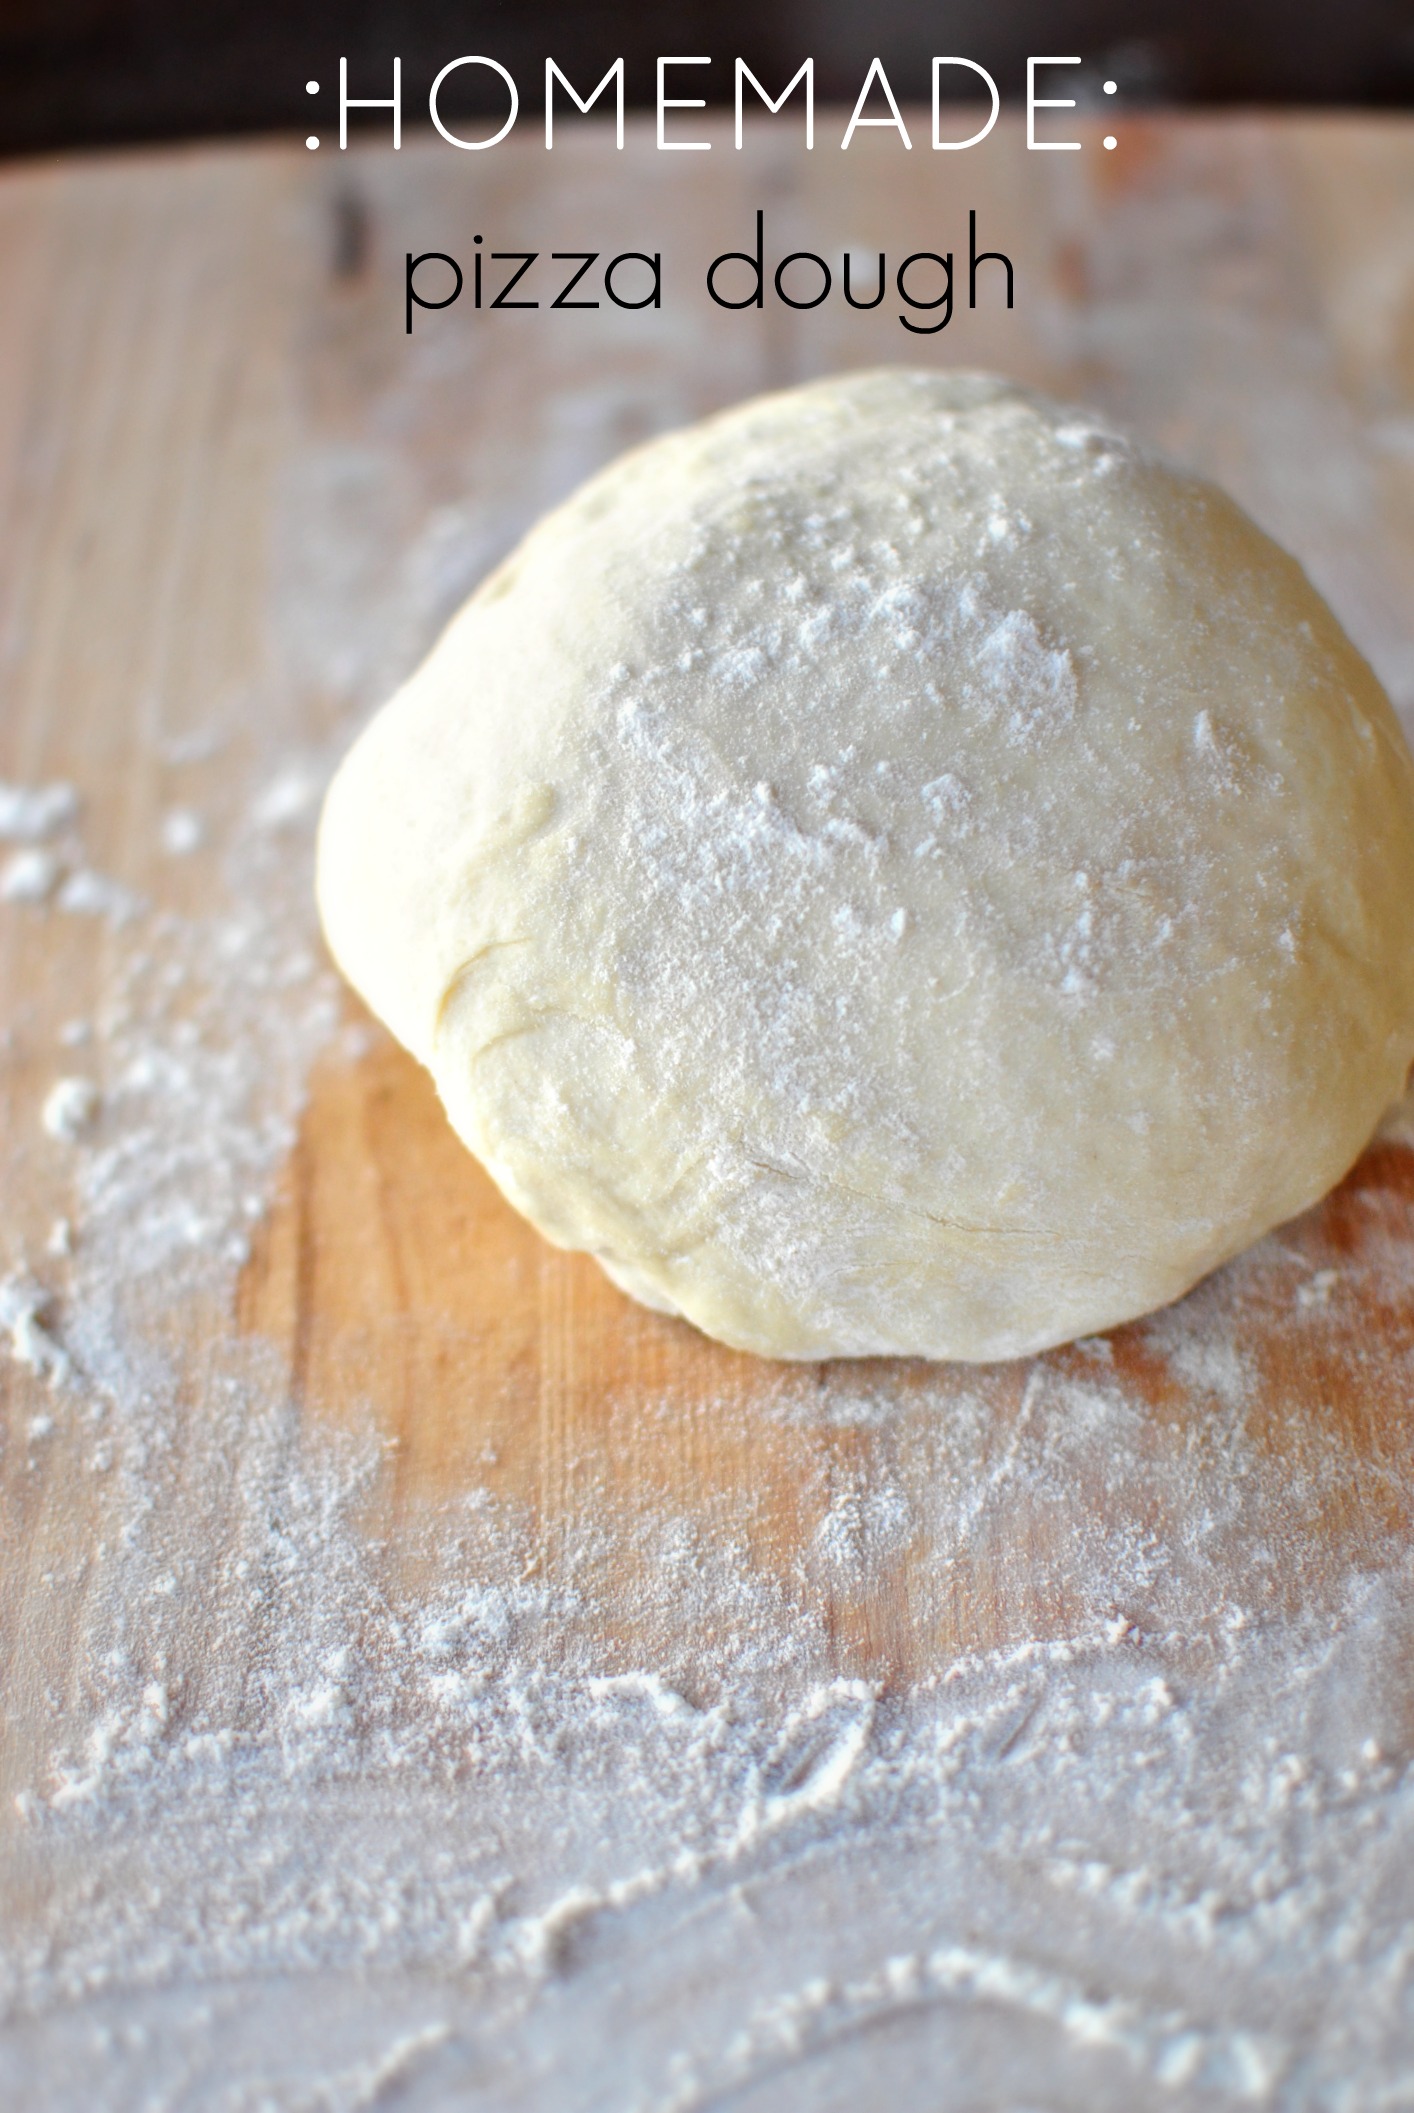 Homemade Pizza Dough from Scratch + Grilled Pizza